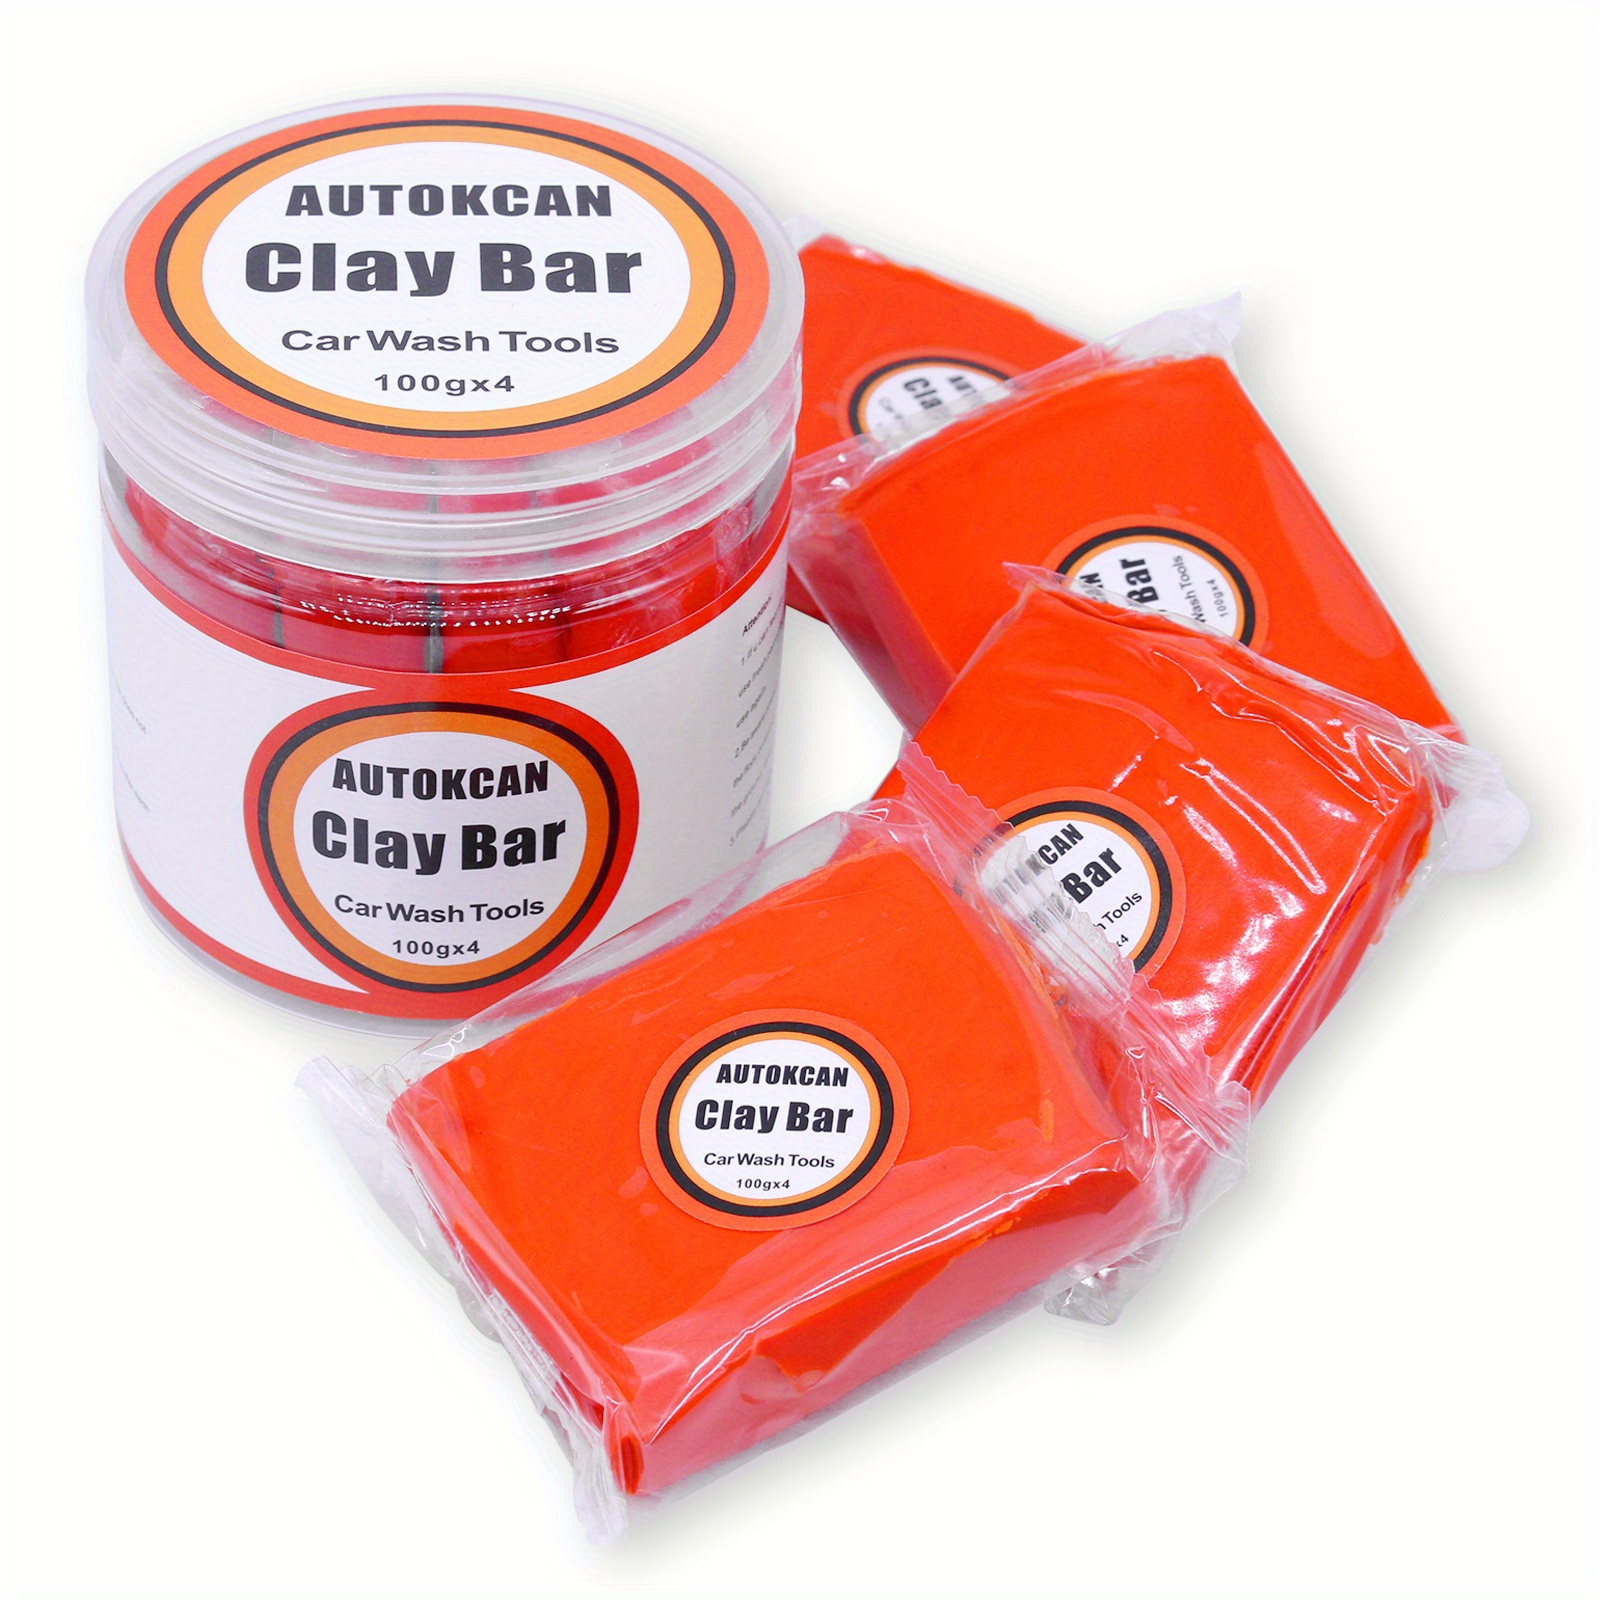 Clay Bar 3packs X 3.53oz Car Clay Bar Auto Detailing Premium Clay Bar, For  Car Detailing Car Cleaning Kit Cleaner For Car SUV With Storage